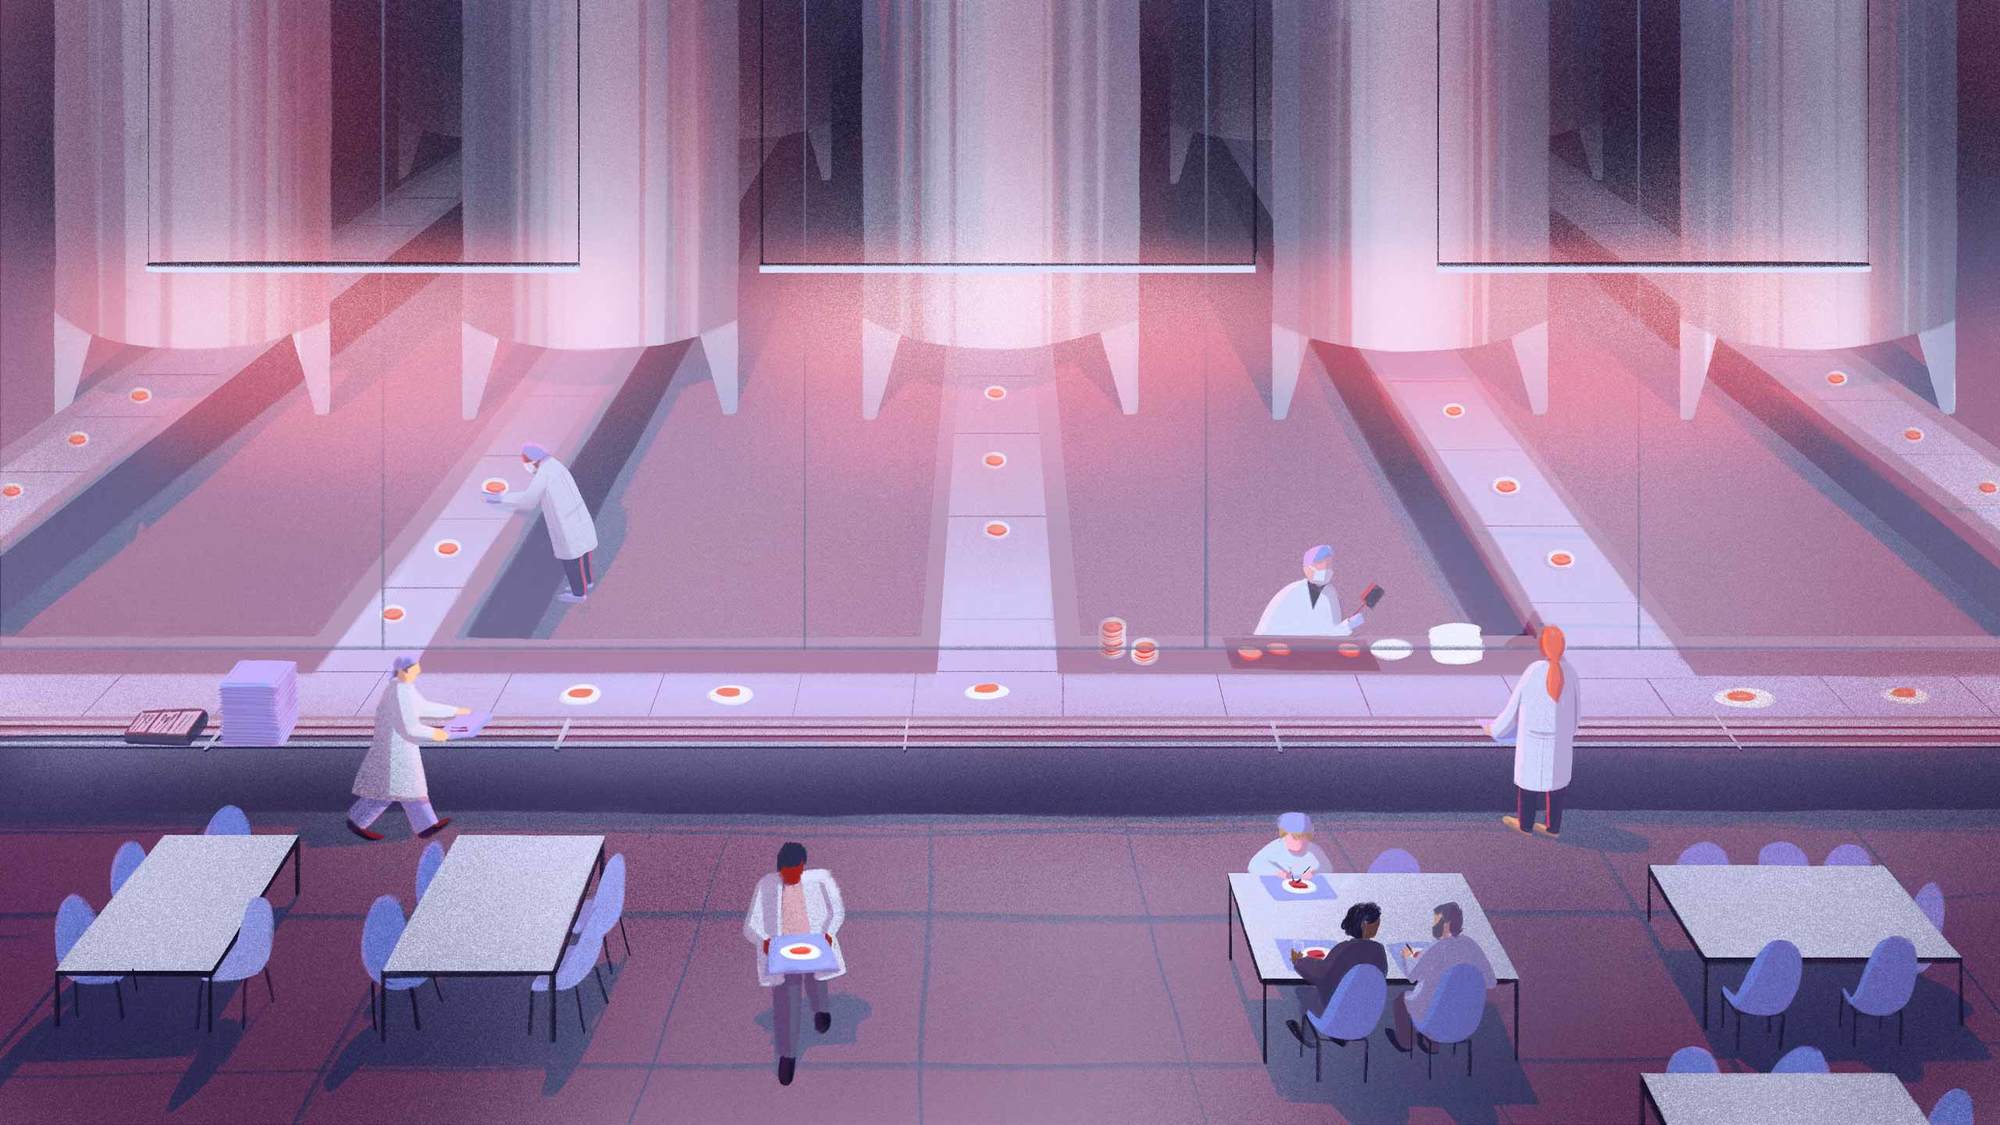 An aerial view of bioreactors producing meat on a convey belt while people sit in the foreground in a cafeteria eating the meat. September 2021